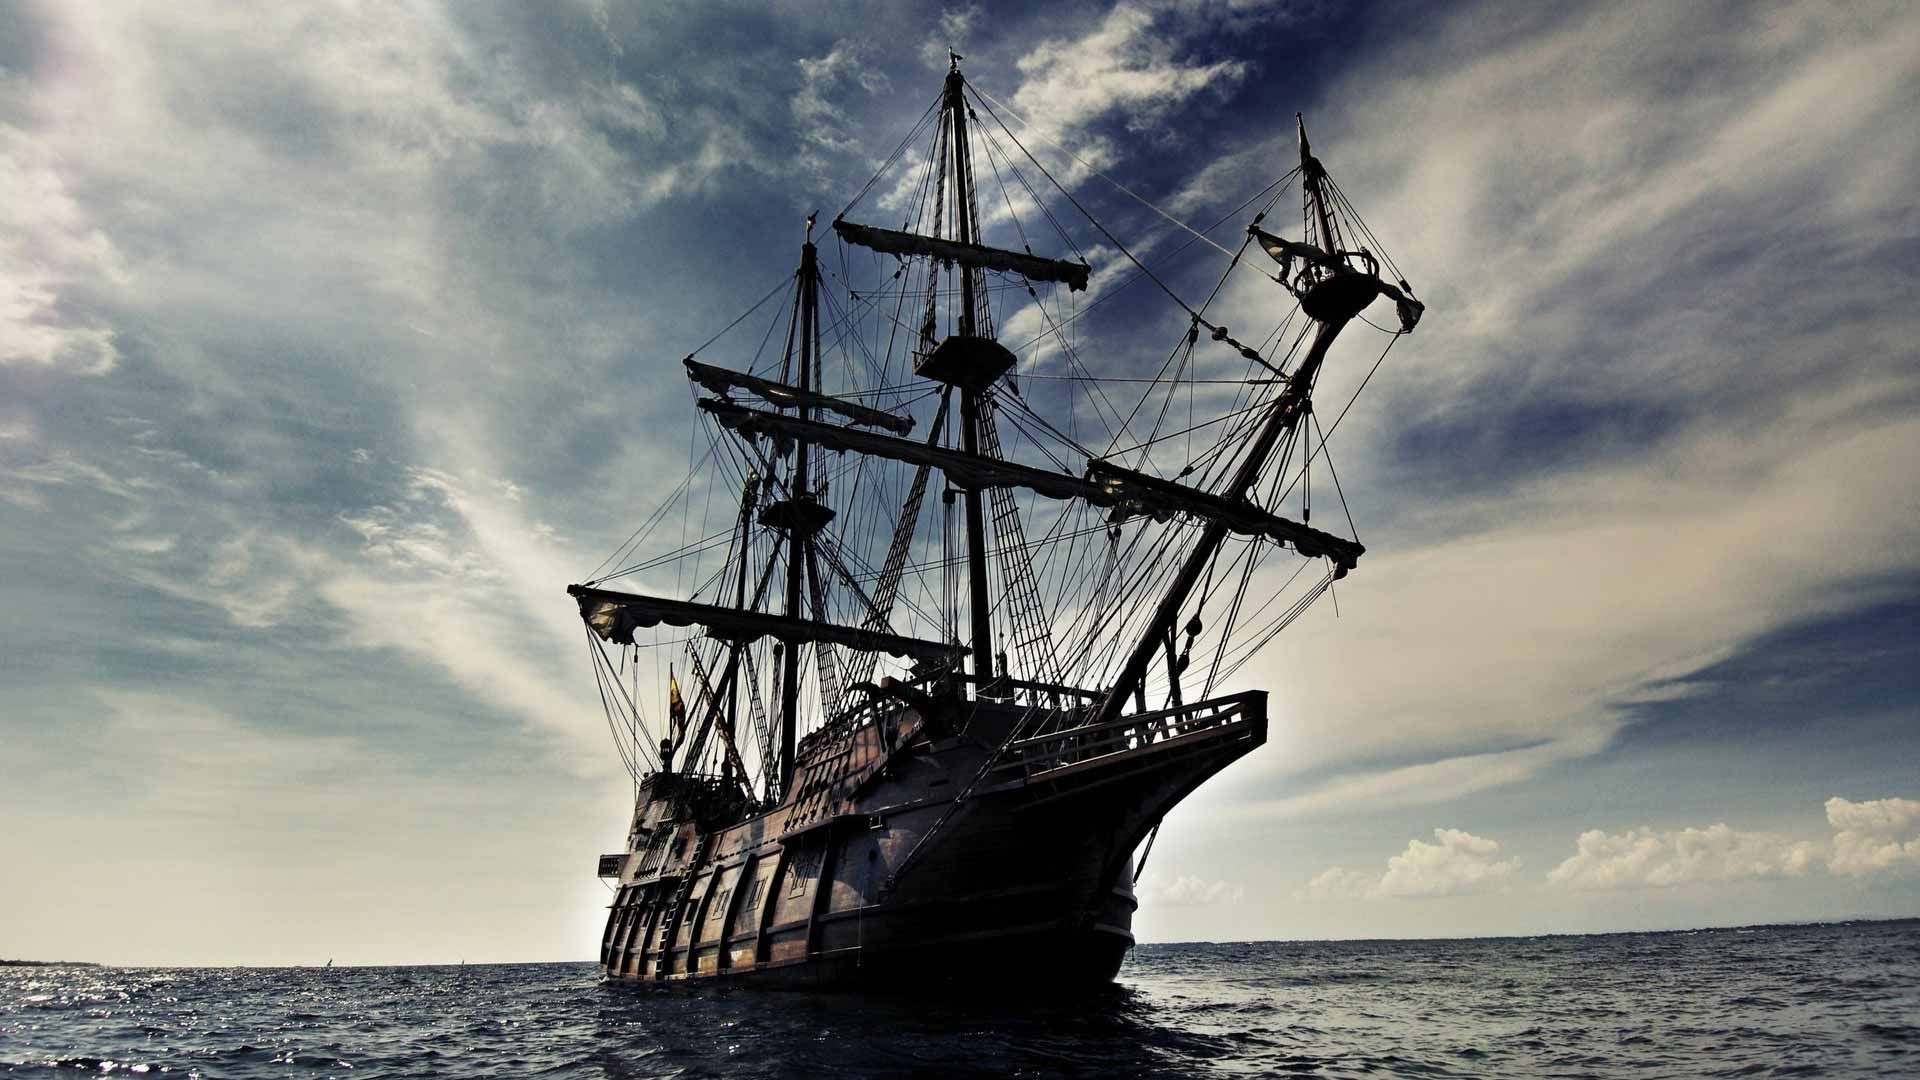 1920x1080 Pirates Of The Caribbean Black Pearl Wallpaper For Mac #7w9